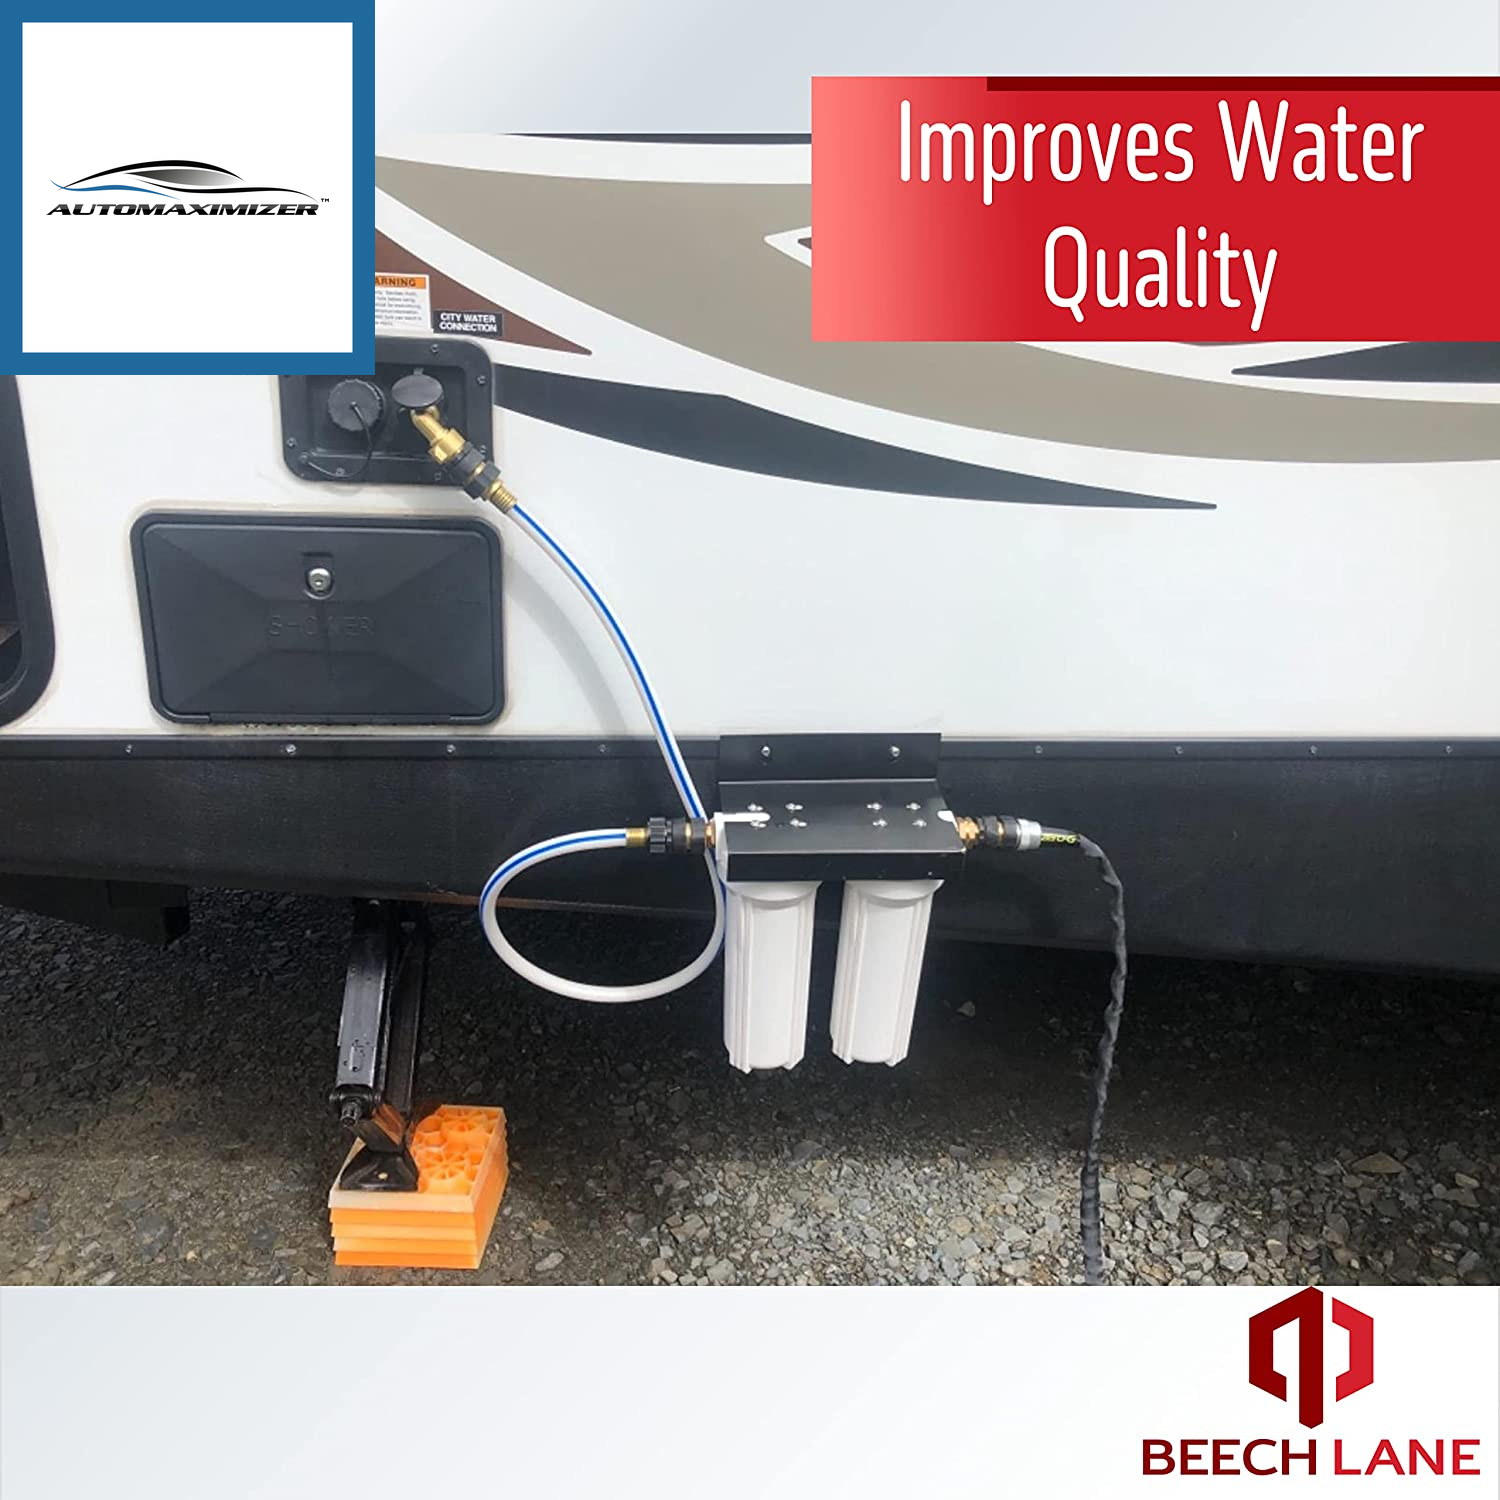 External RV Dual Water Filter System, Leak-Free Brass Fittings, Mounting Bracket and Two Filters Included, Sturdy Construction Is Built to Last